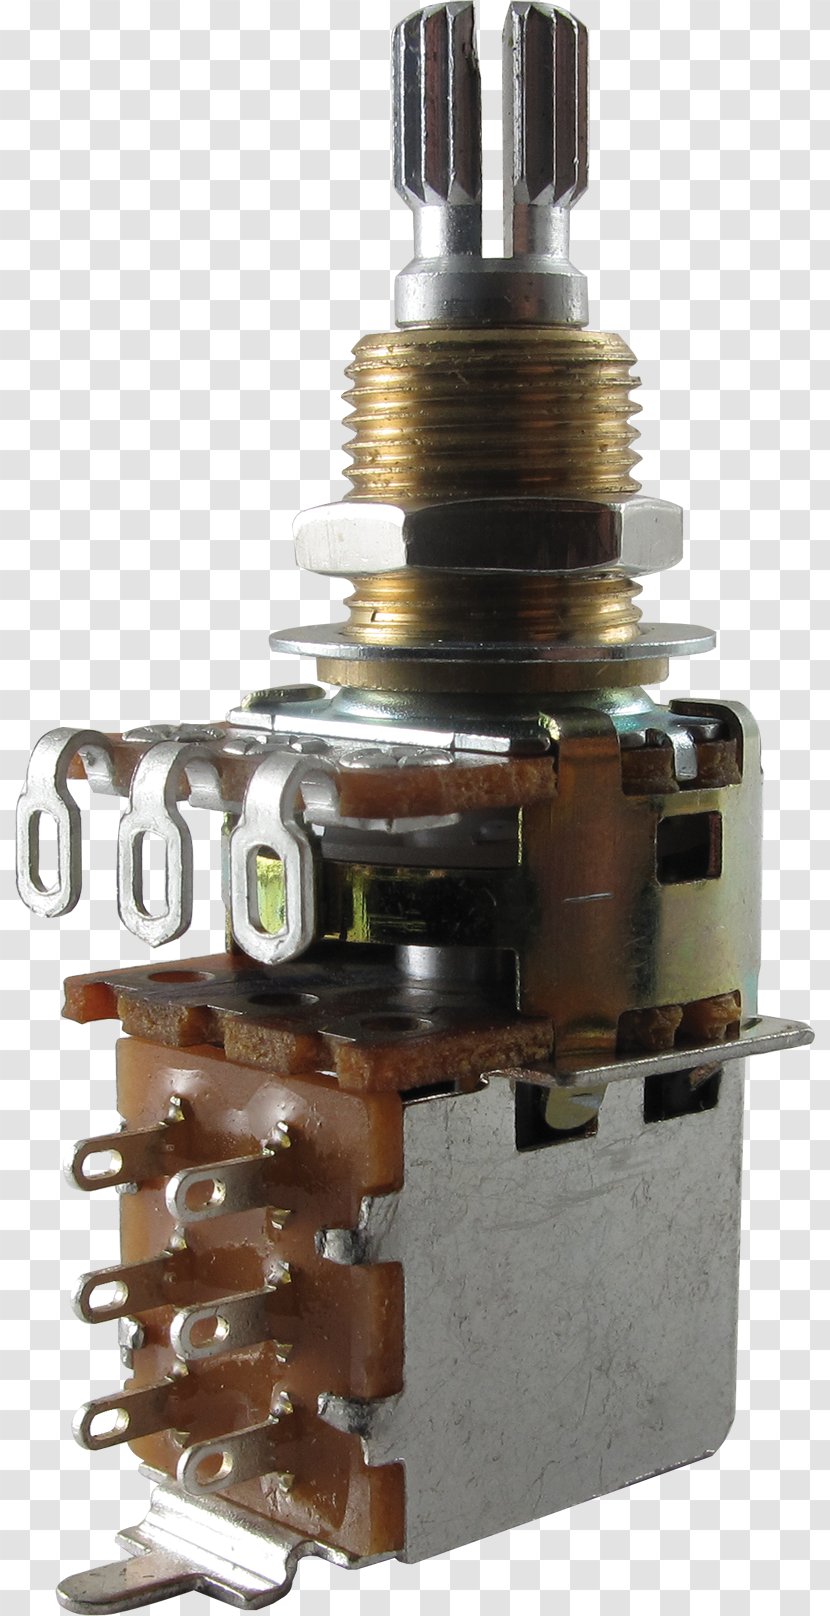 Potentiometer Bourns, Inc. Electrical Switches Guitar Wiring Coil Tap - Circuit Component - Push Pull Transparent PNG